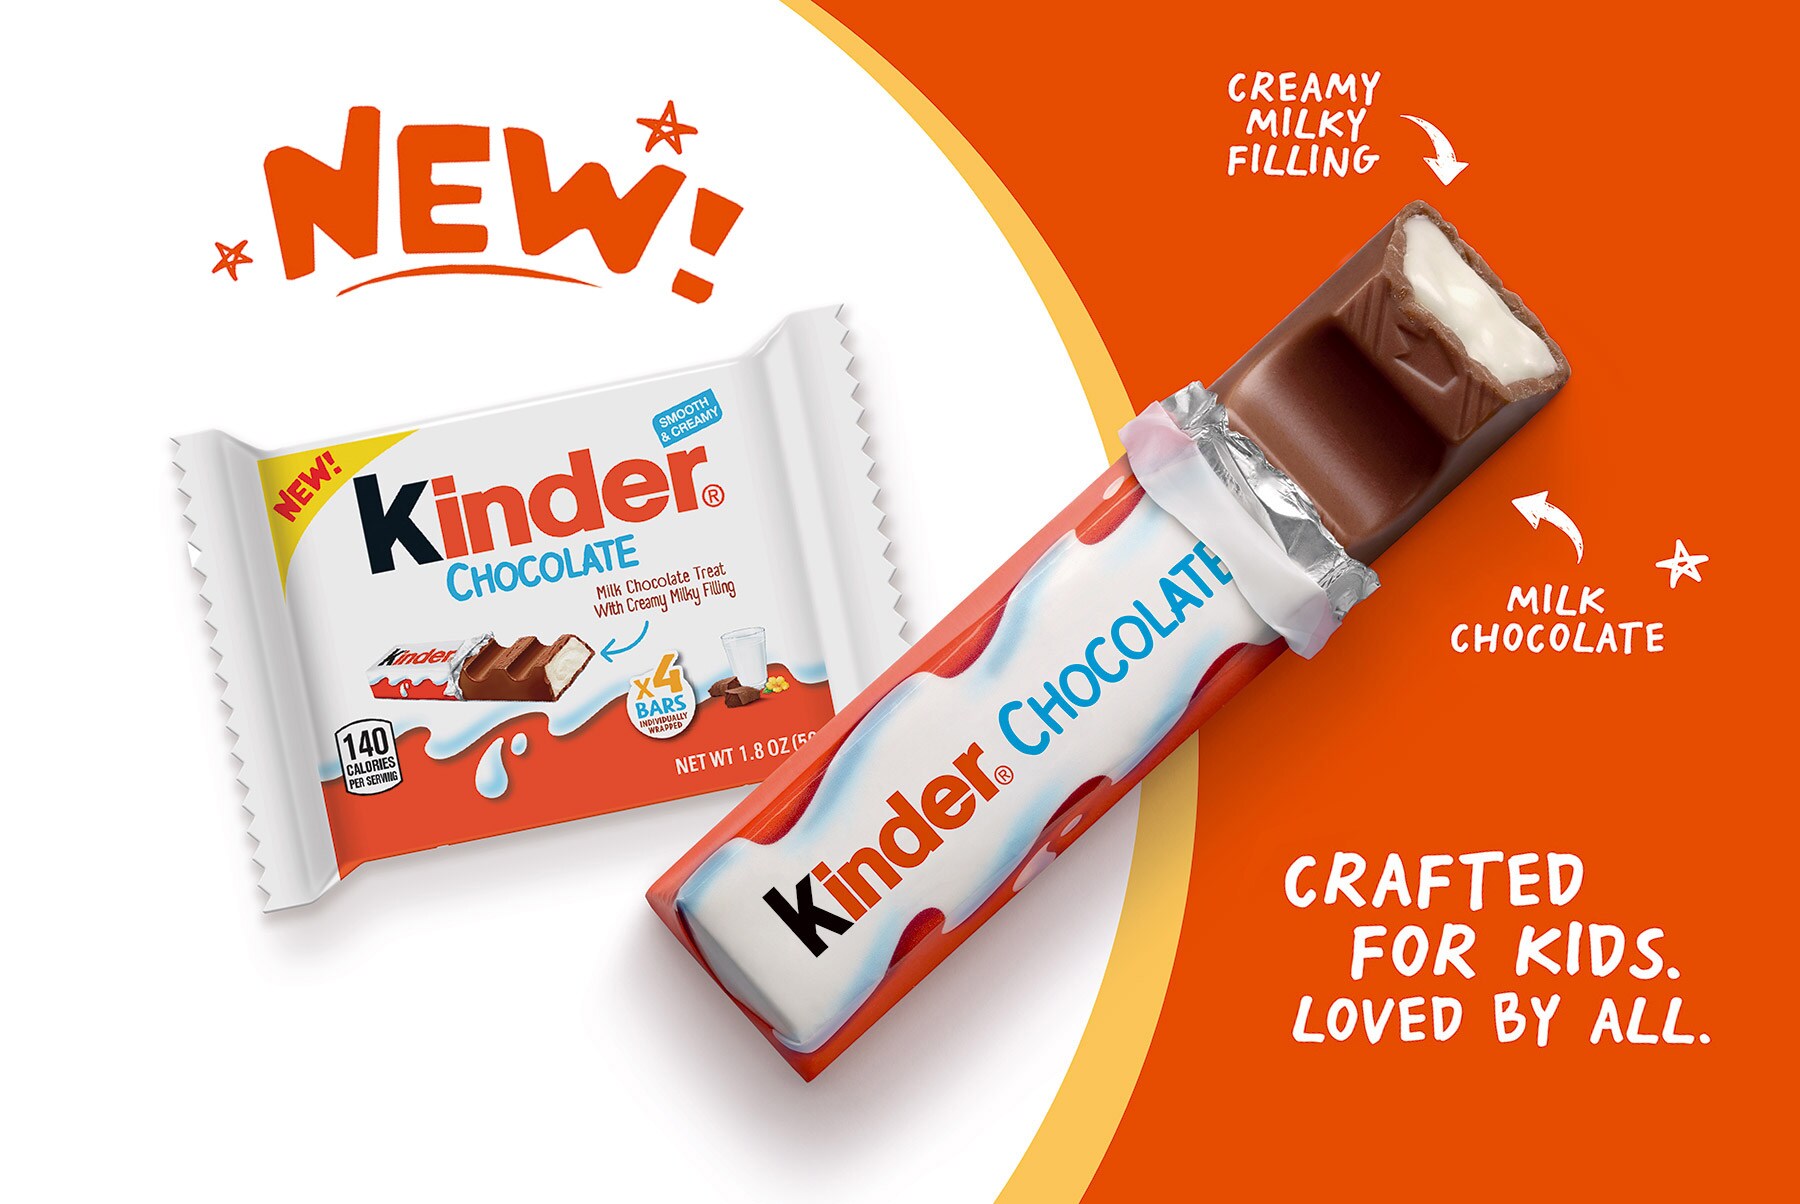 Kinder Country (Pack of 3)